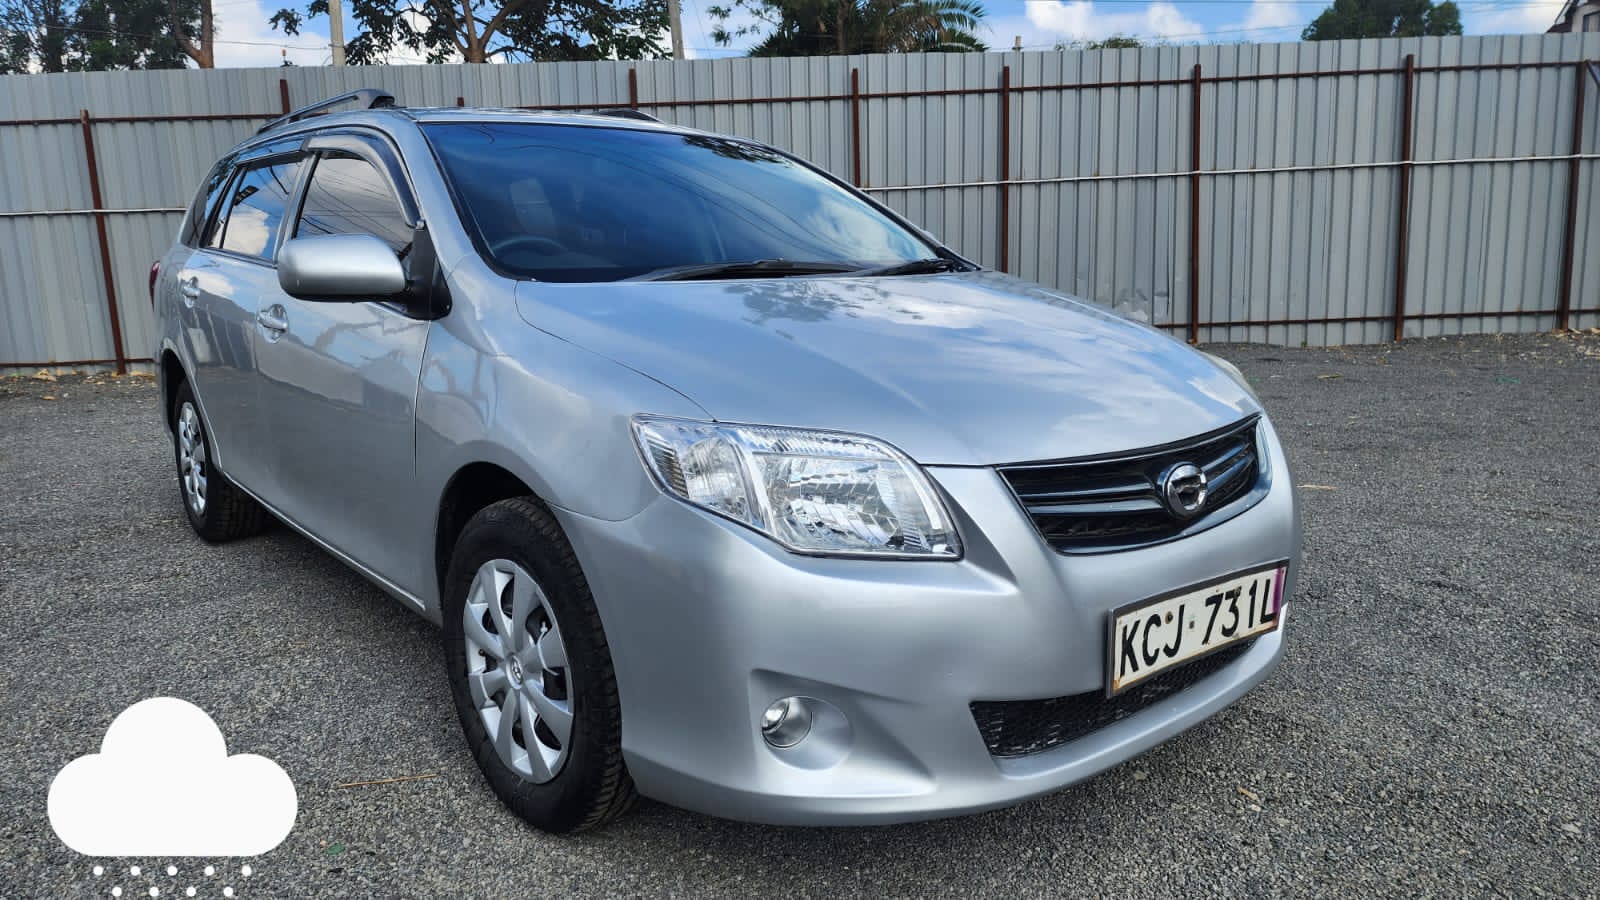 Toyota fielder 2011 QUICK SALE You Pay 20% Deposit Trade in OK EXCLUSIVE